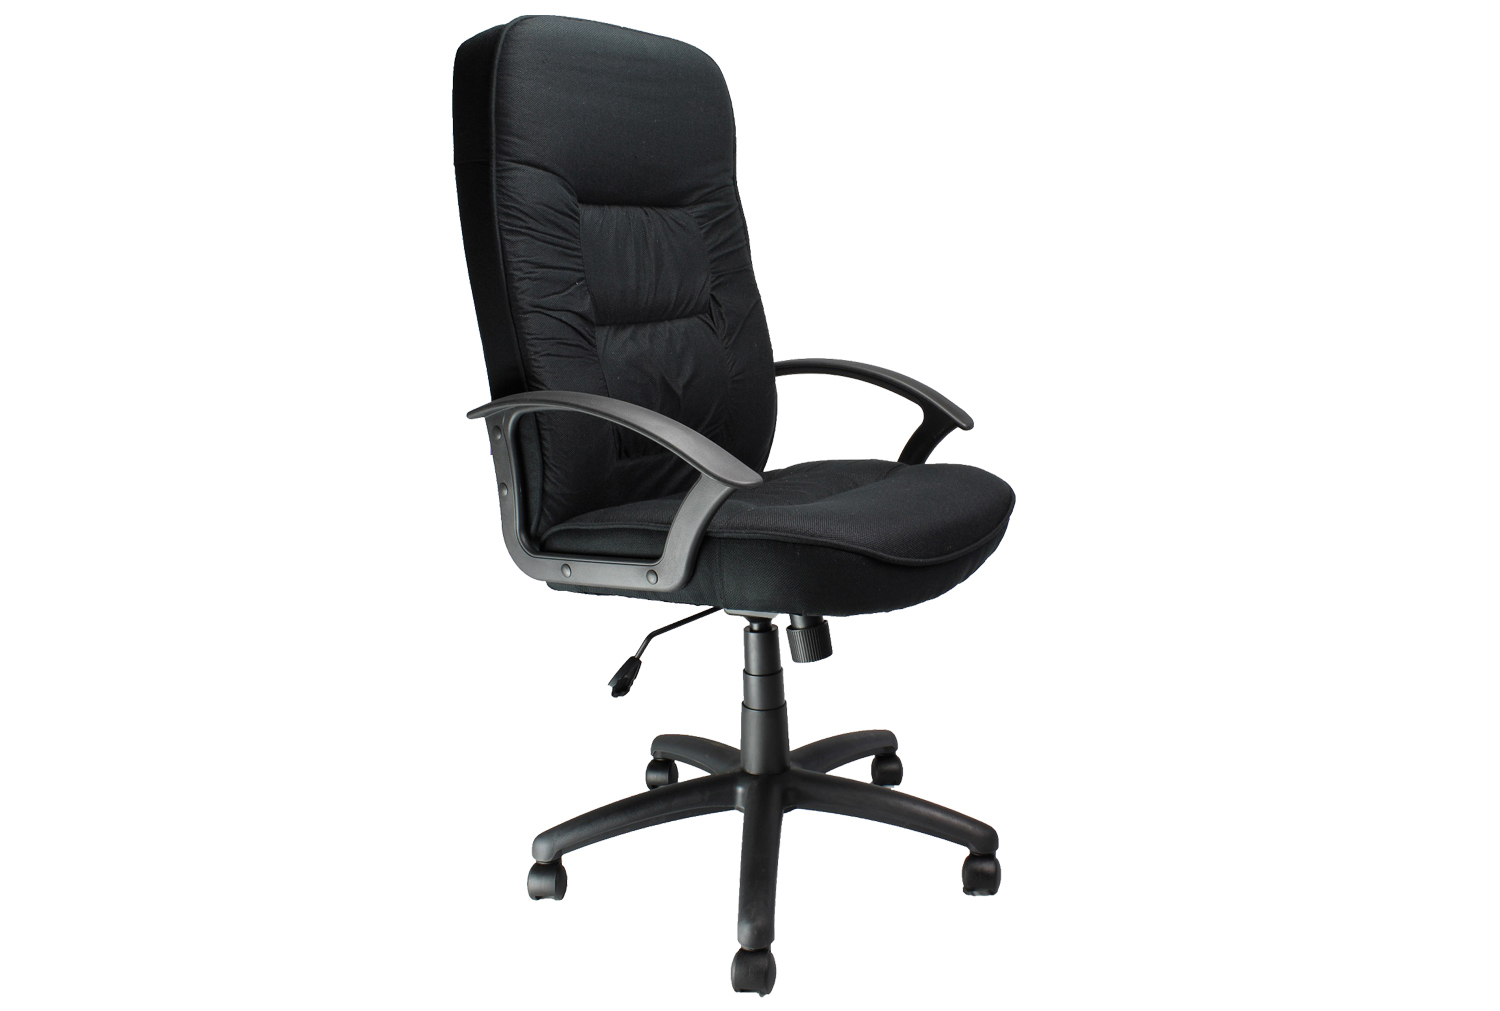 Nero High Back Fabric Executive Office Chair (Black), Fully Installed